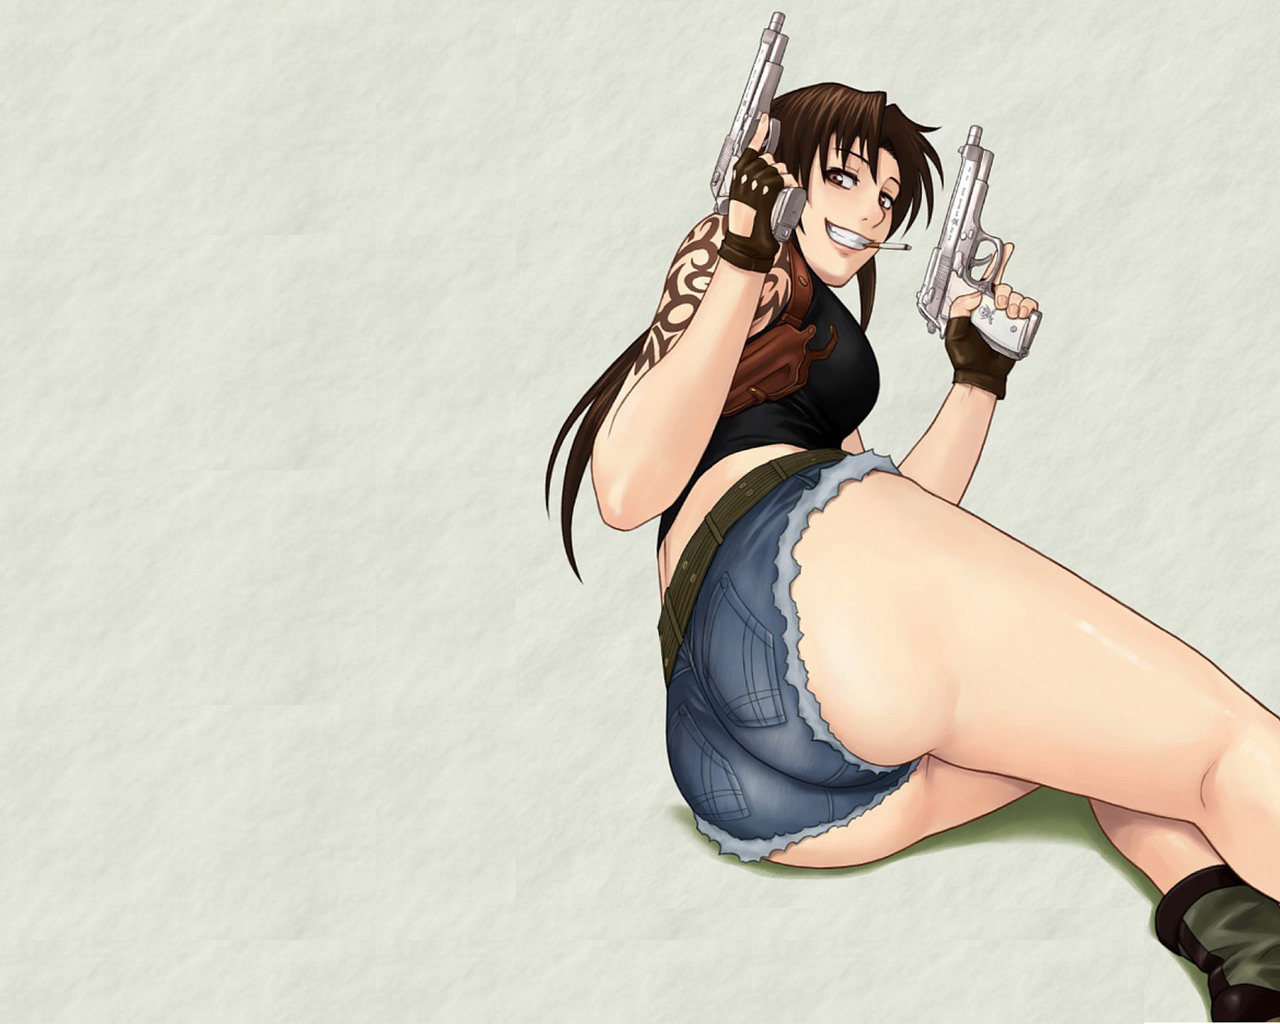 Revy 5 Sexy Wallpapers | Your daily Anime Wallpaper and Fan Art